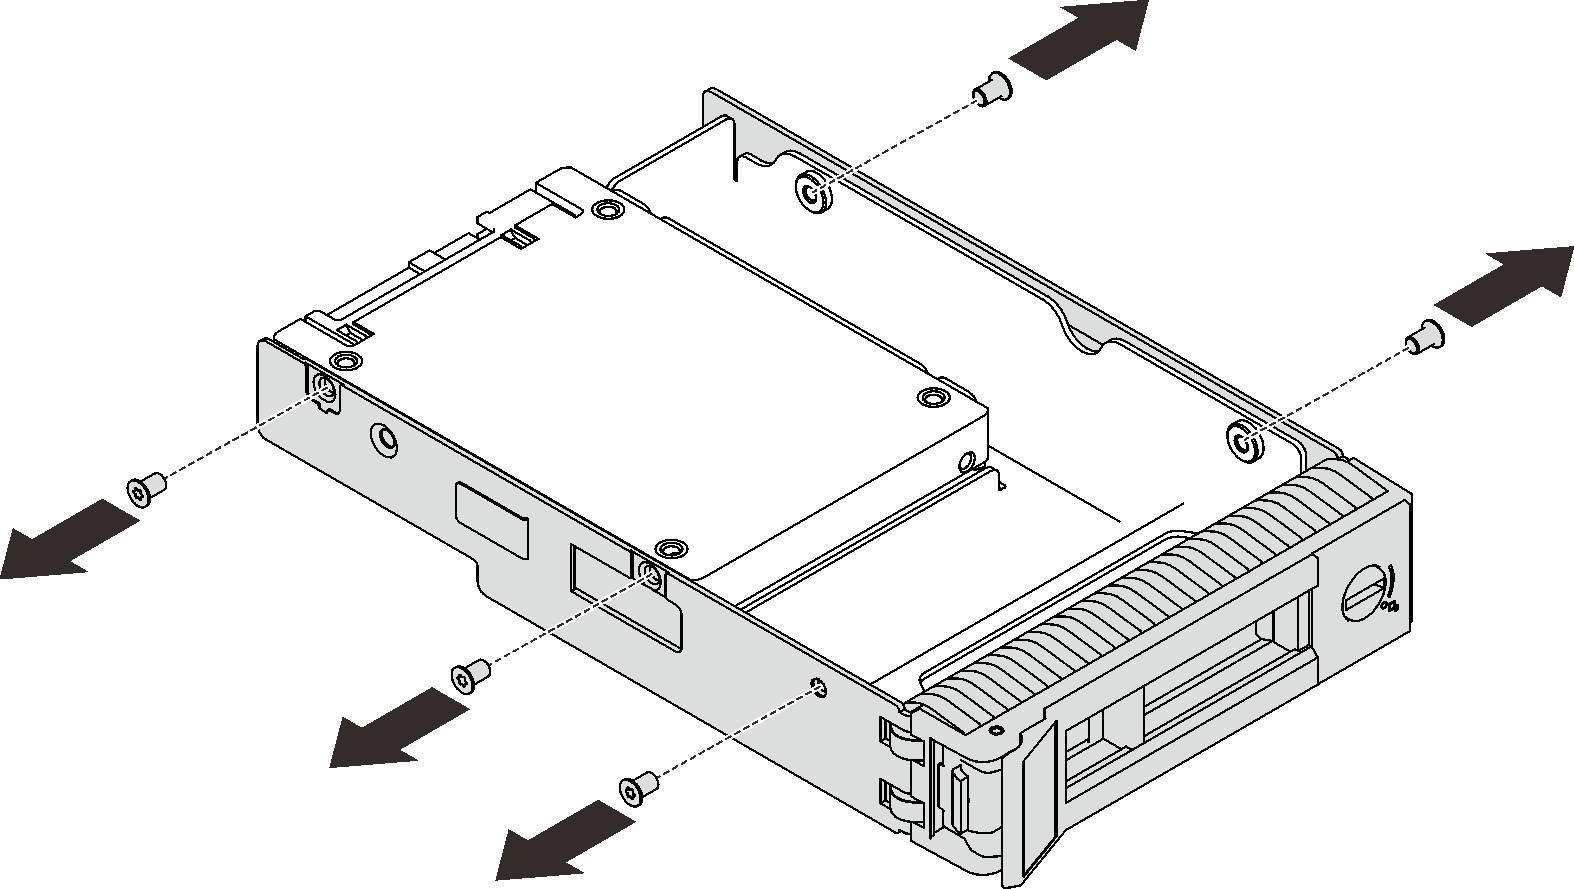 Removing the screws that secure the 2.5-inch drive and the drive adapter